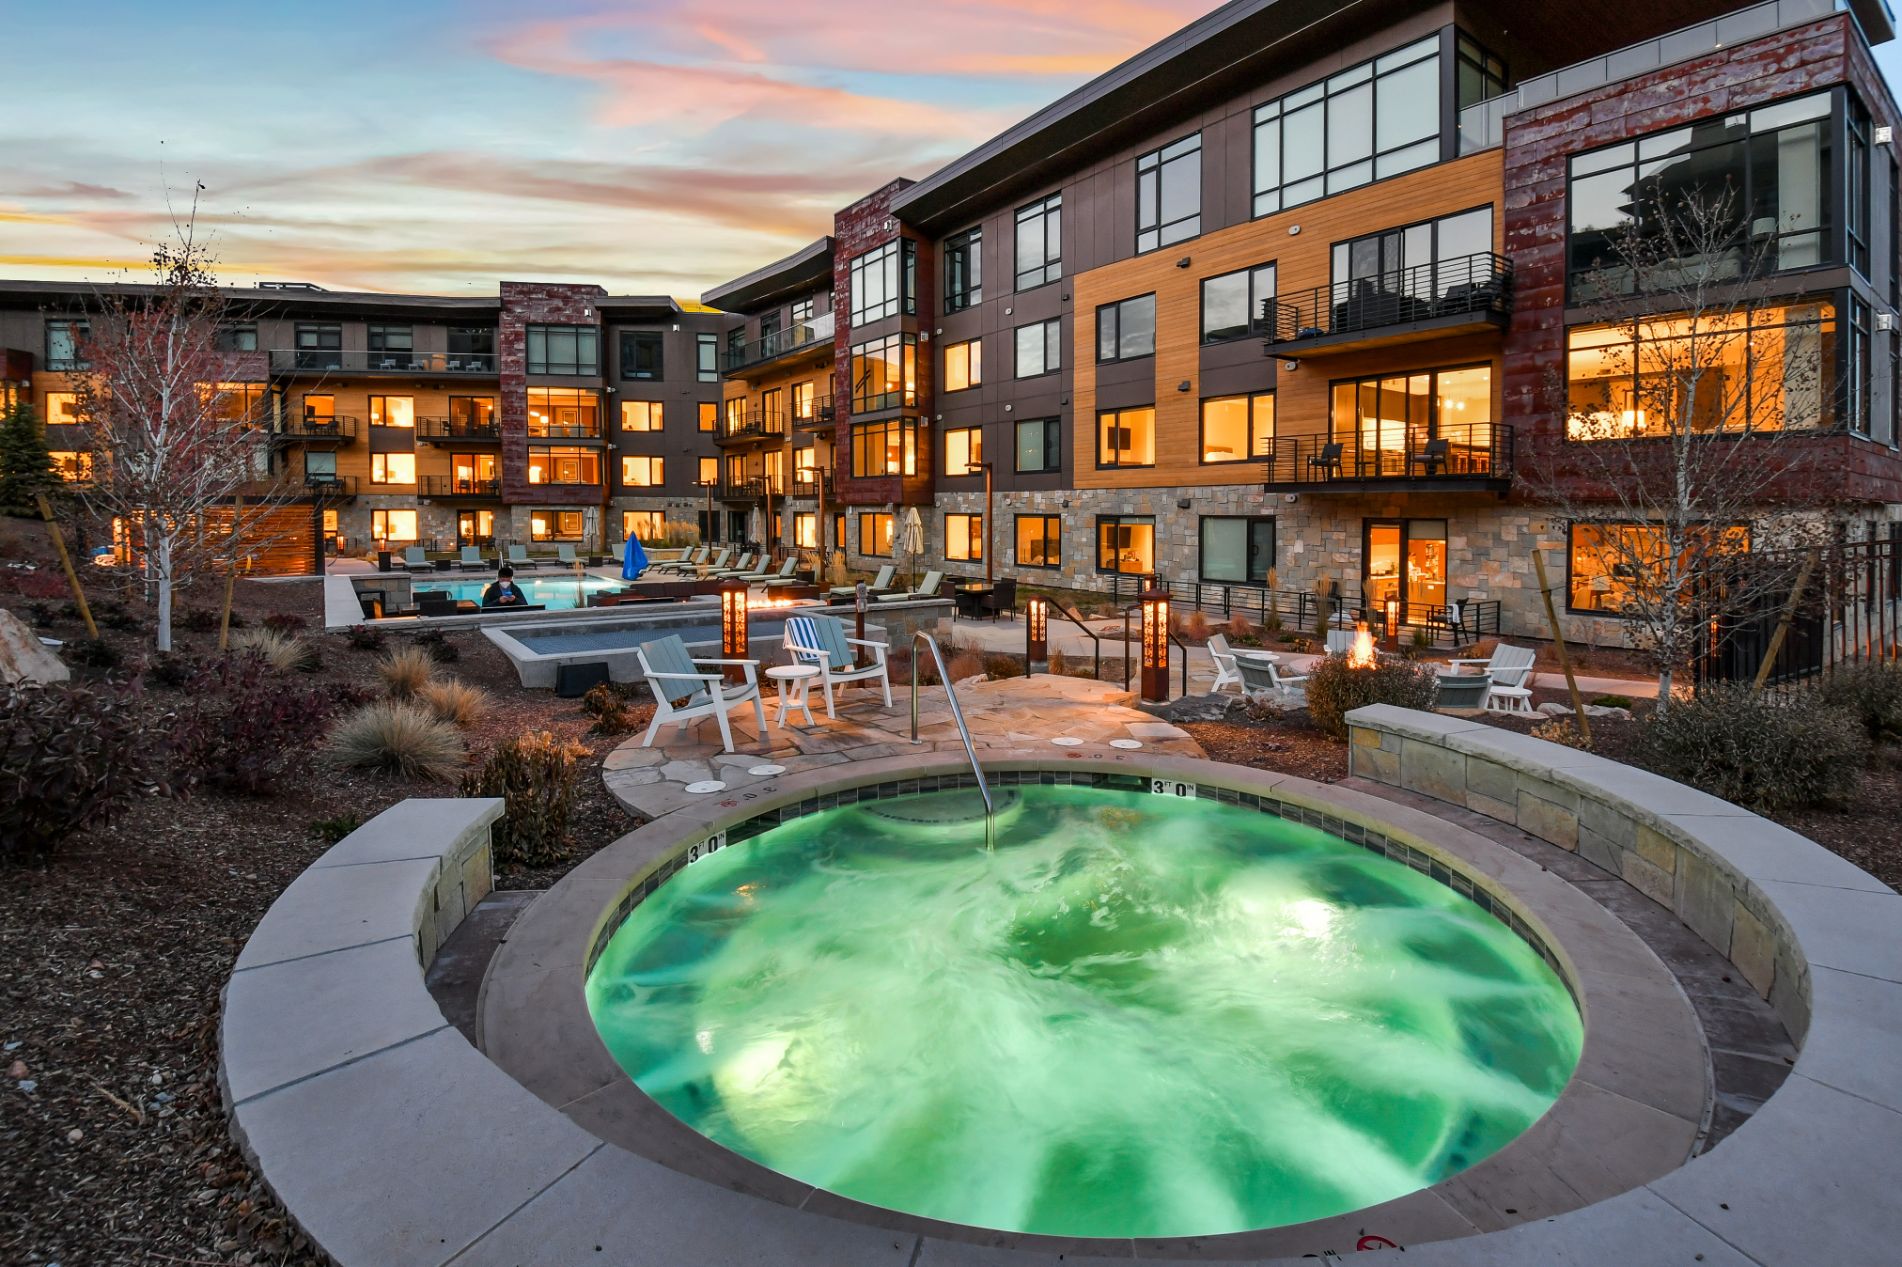 View our Lift Park City vacation rentals